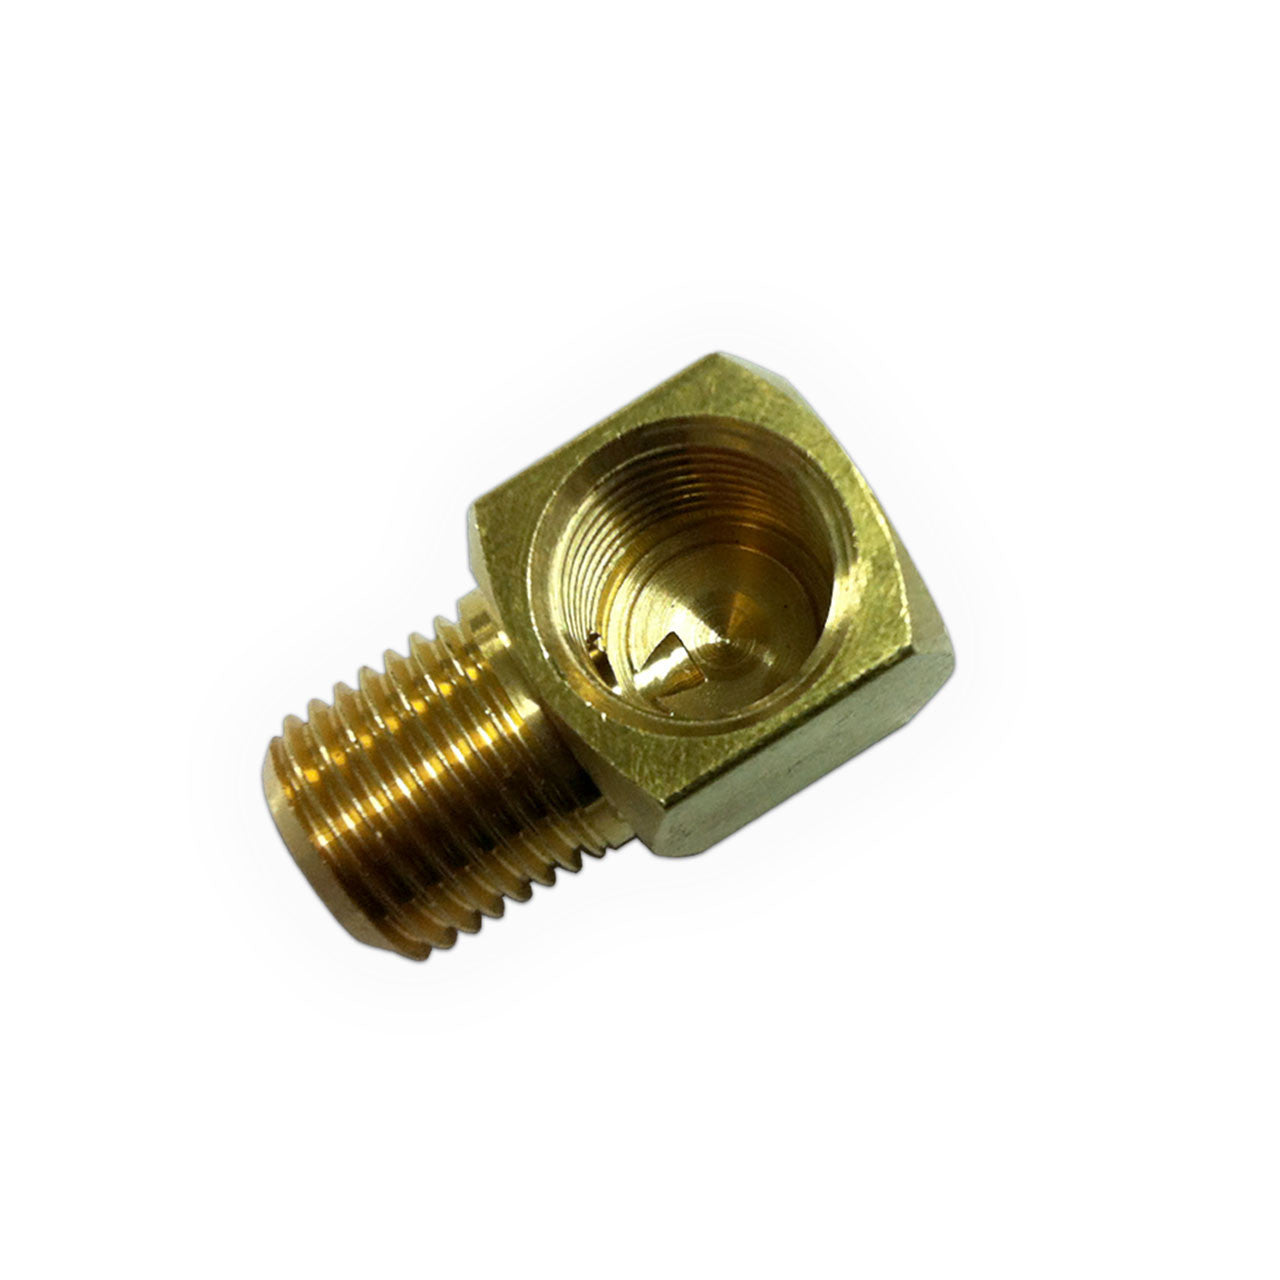 90 Degree Brass Fitting 1/4" NPT for Fuel Manager 02N25-04